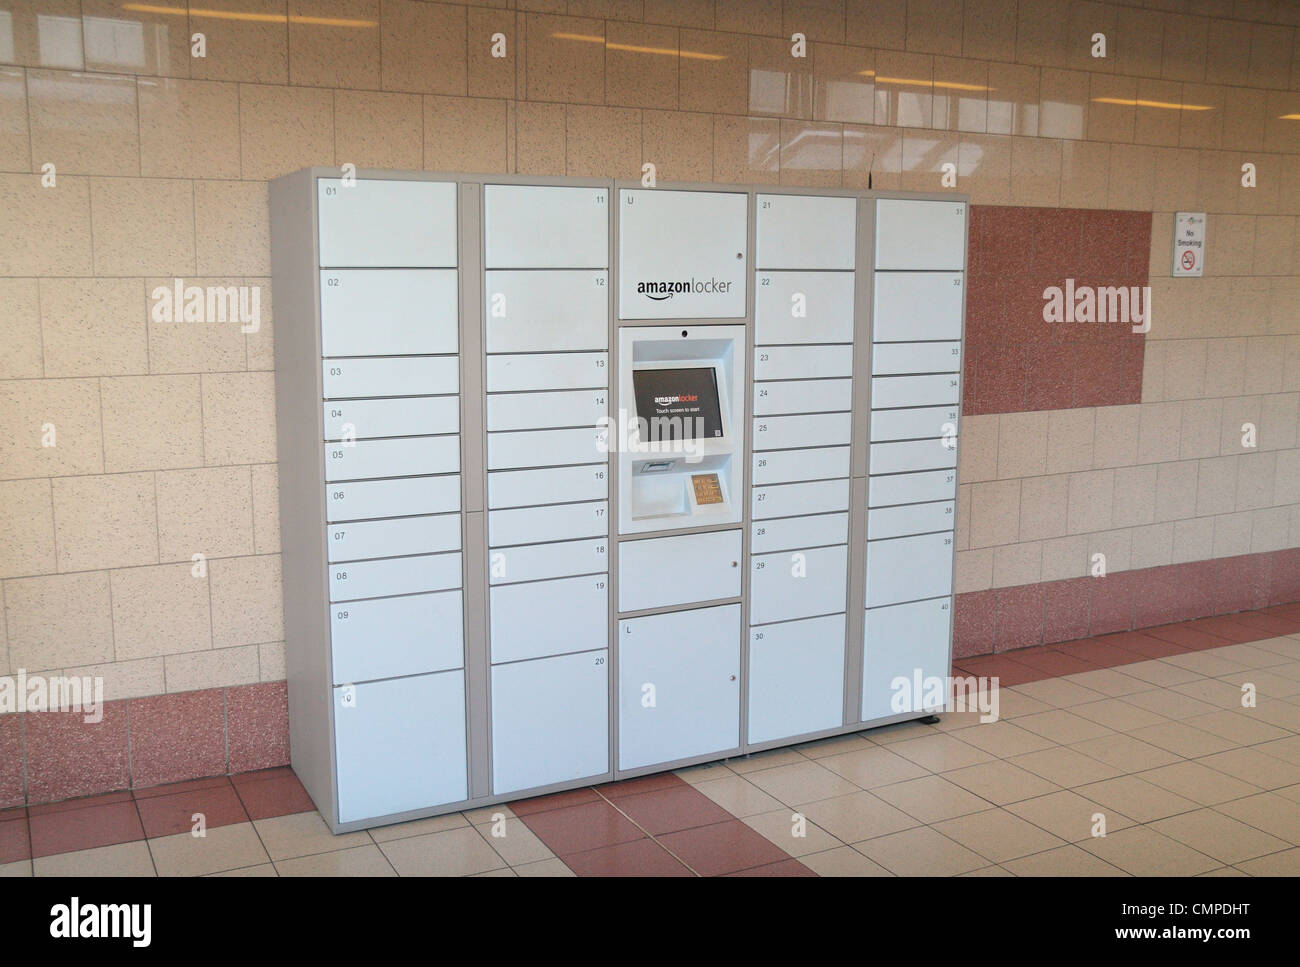 The Amazon Locker collection facility in Hammersmith Broadway, West London, UK. Stock Photo